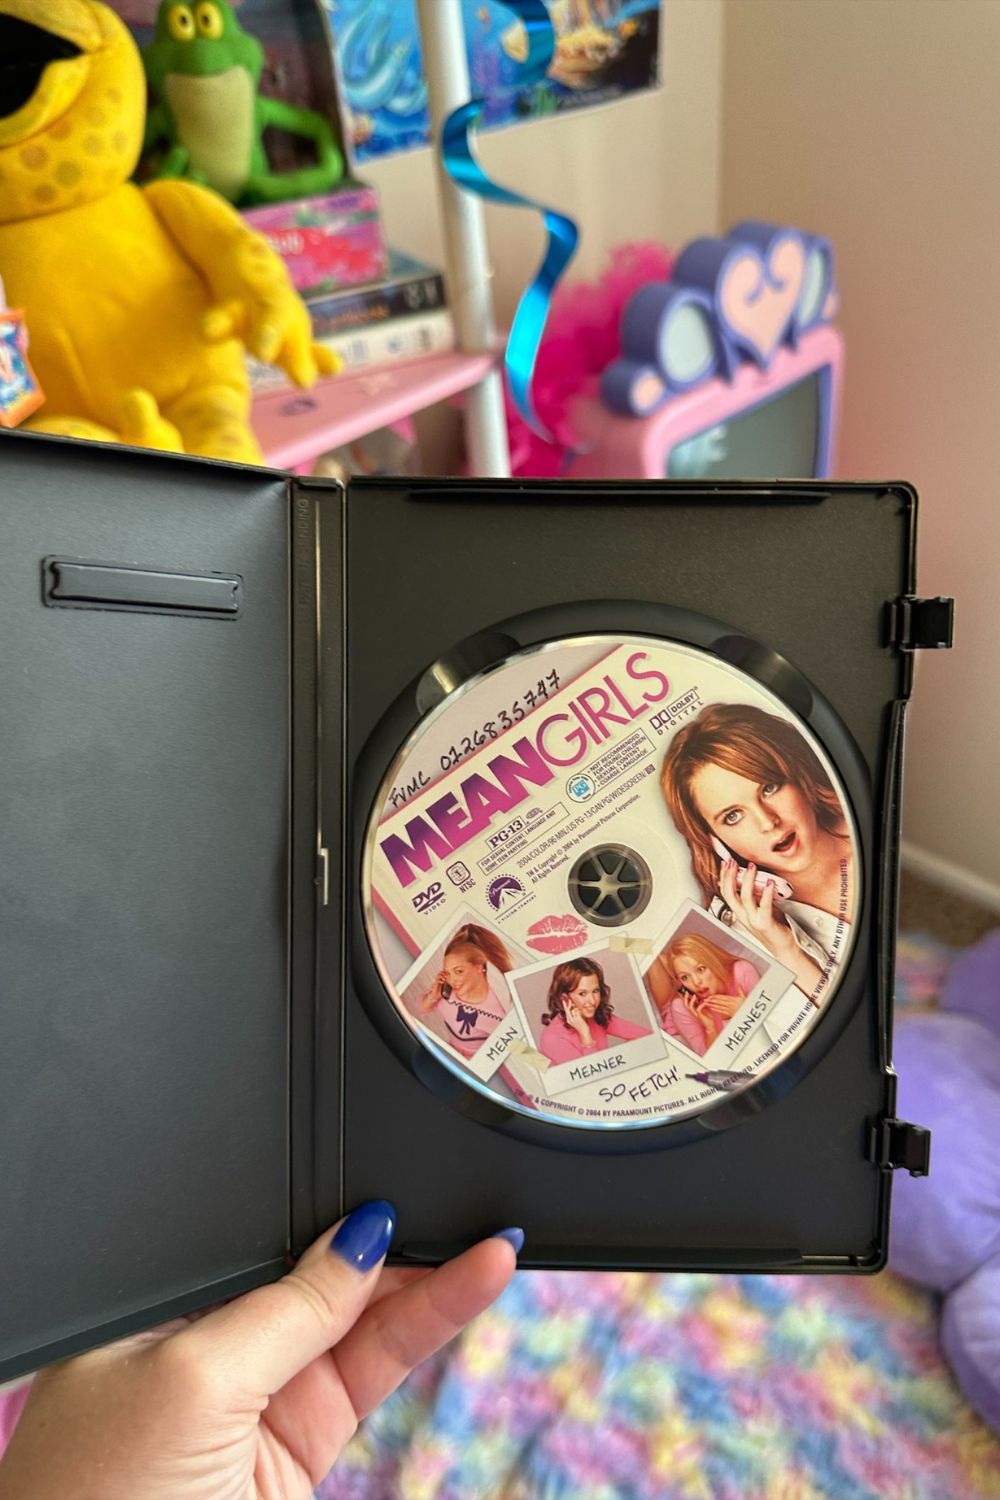 MEAN GIRLS SPECIAL COLLECTORS EDITION DVD*